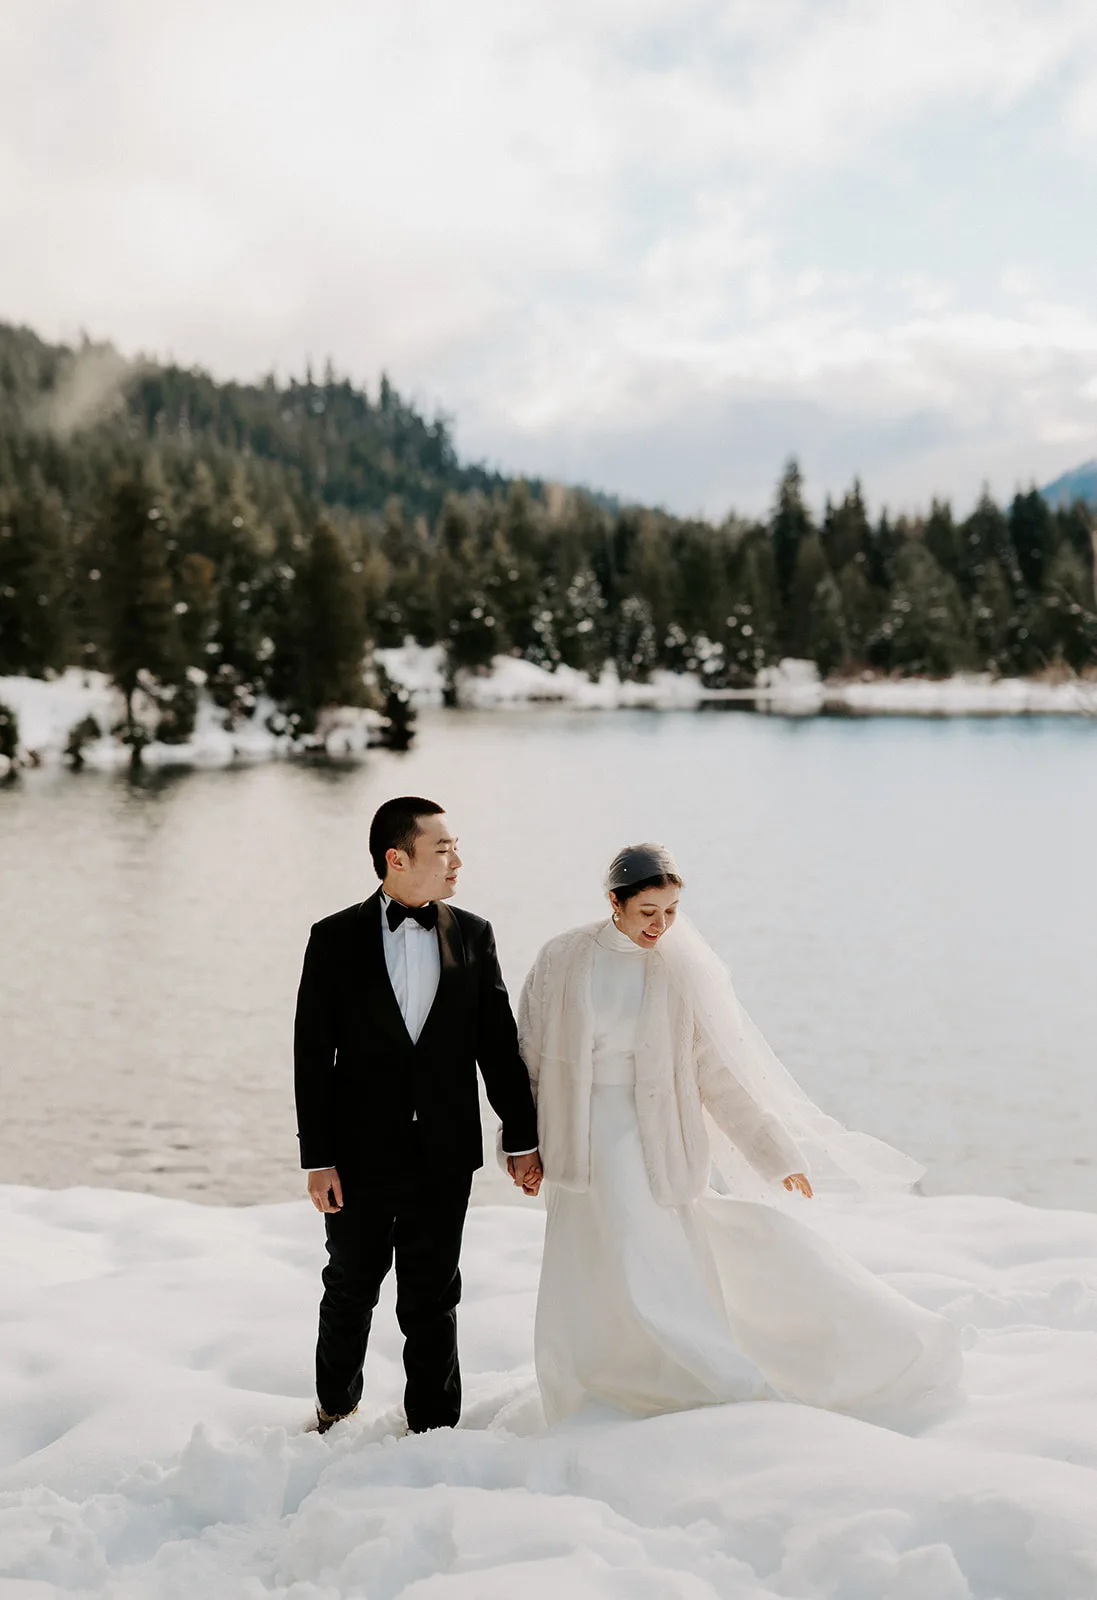 Eloping couple holding hands and walking through the snow, with the bride in a white gown and veil, and the groom in a classic tuxedo.